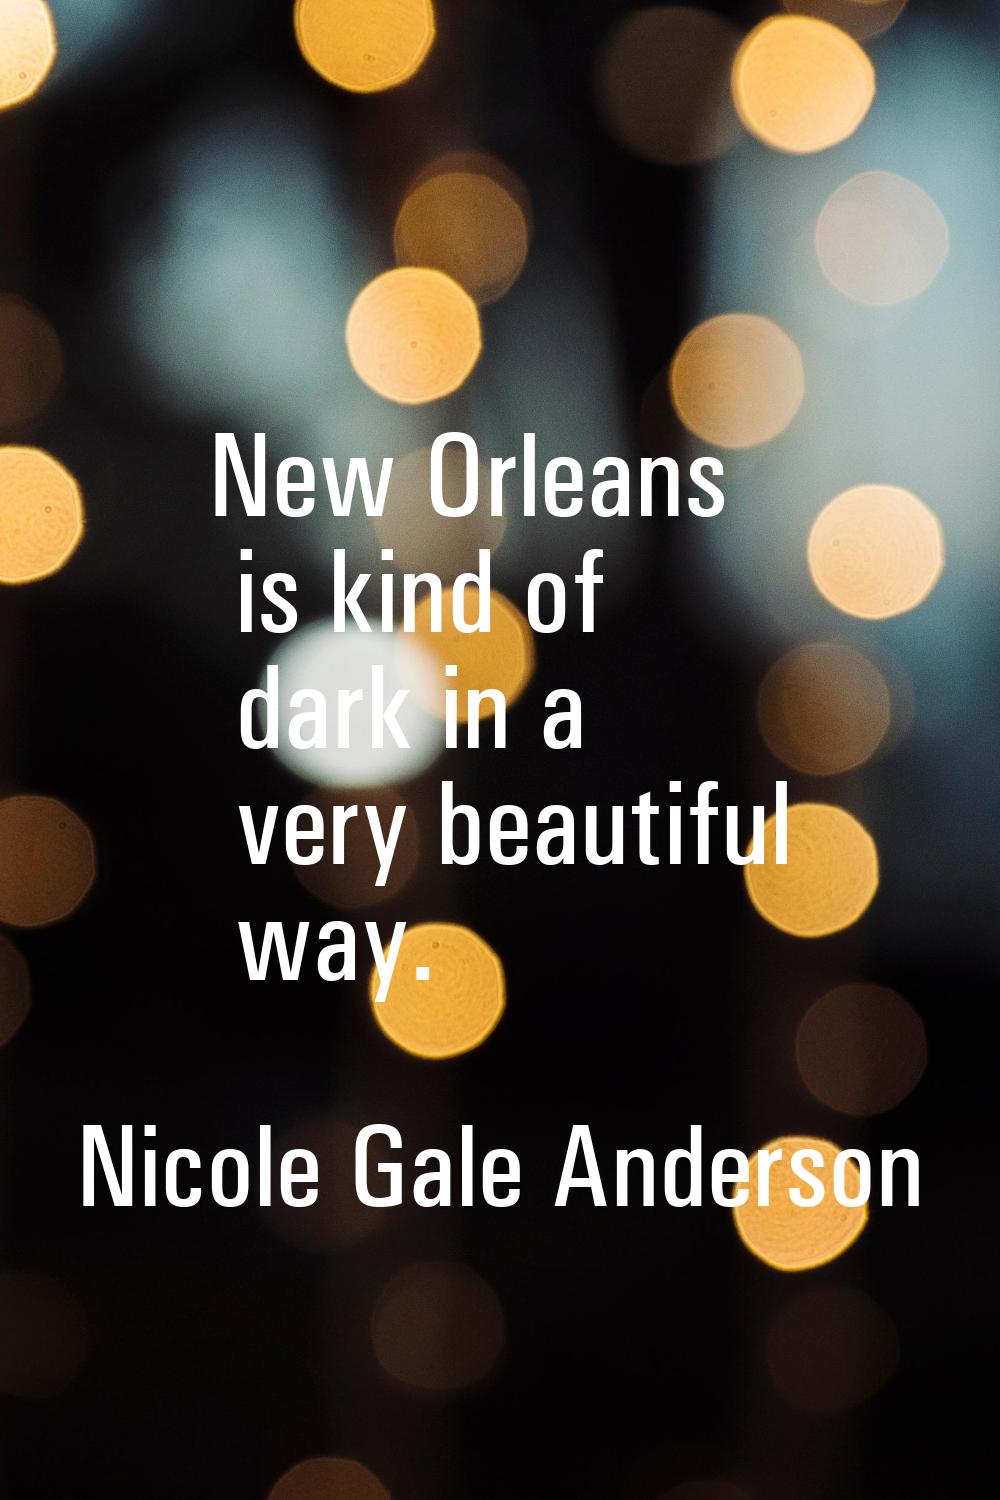 New Orleans is kind of dark in a very beautiful way.